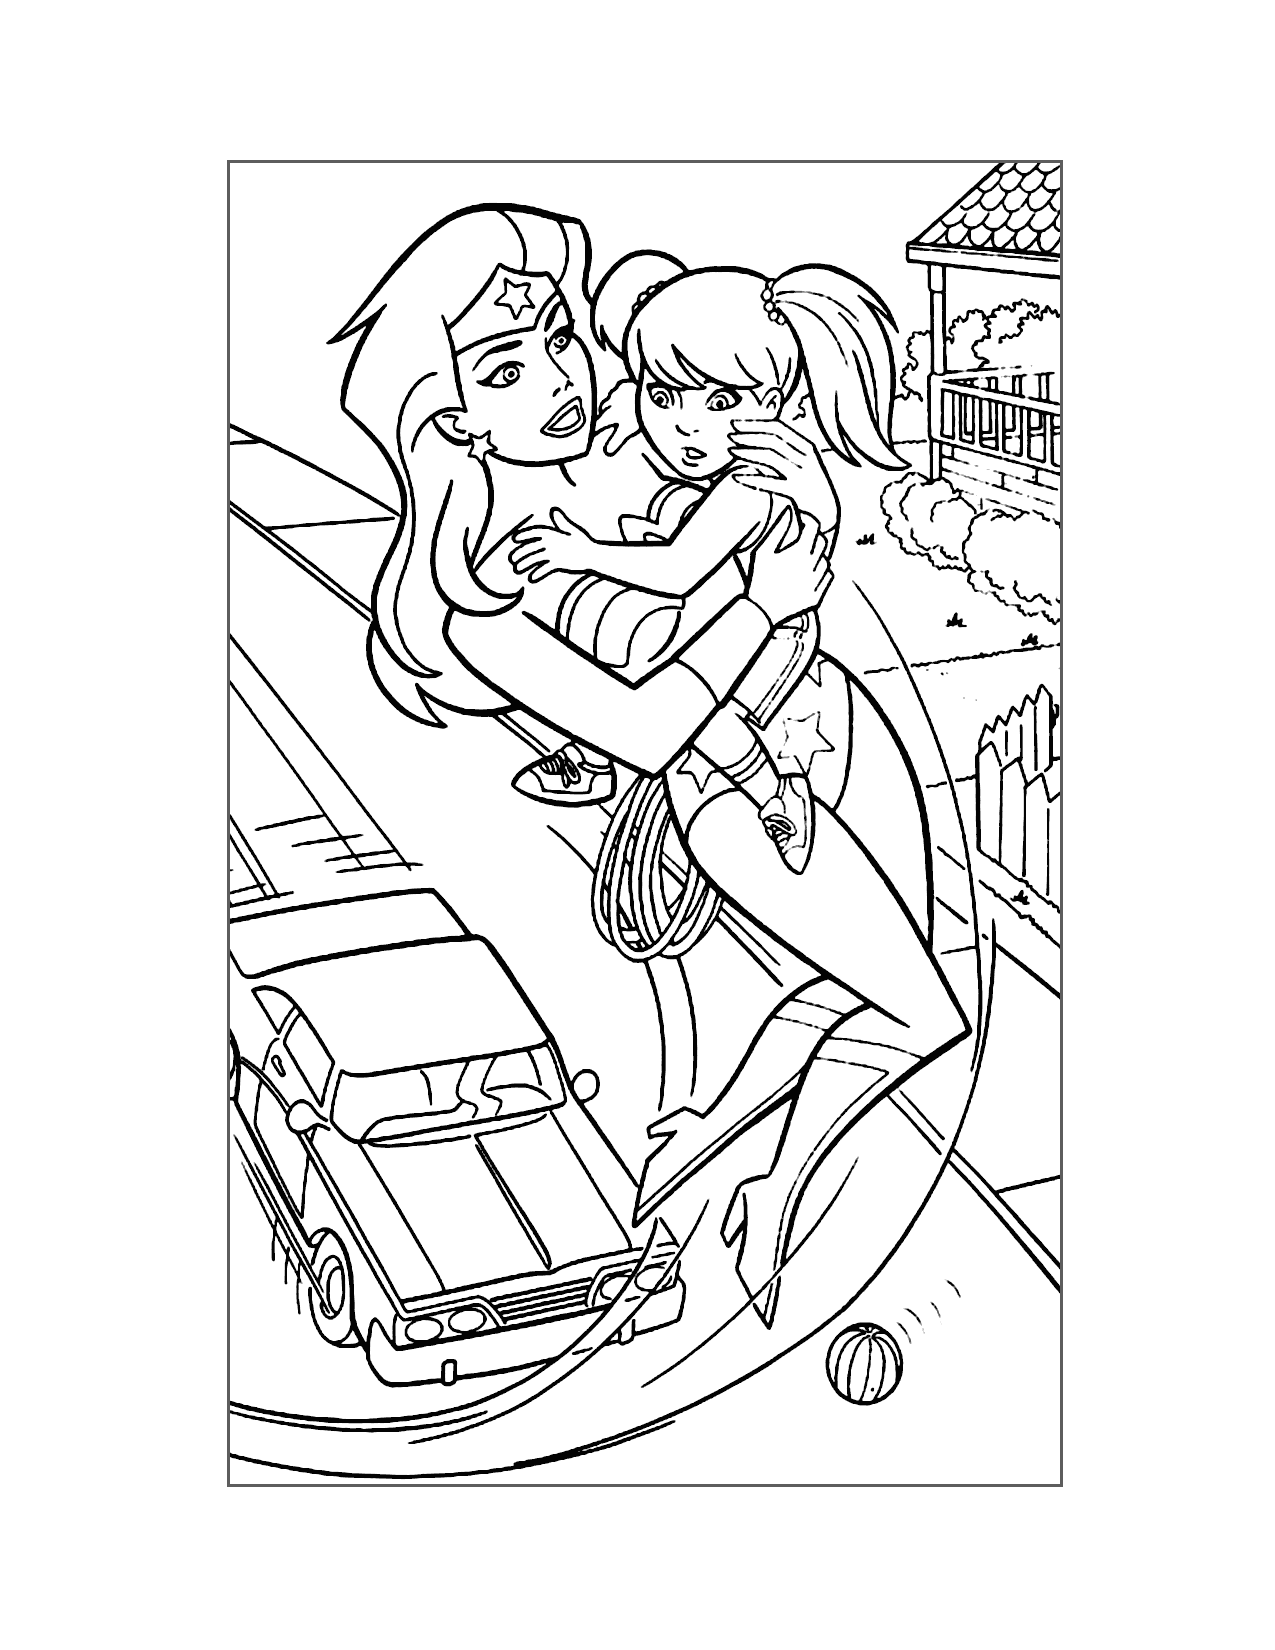 Wonder Woman Saves A Child Coloring Page